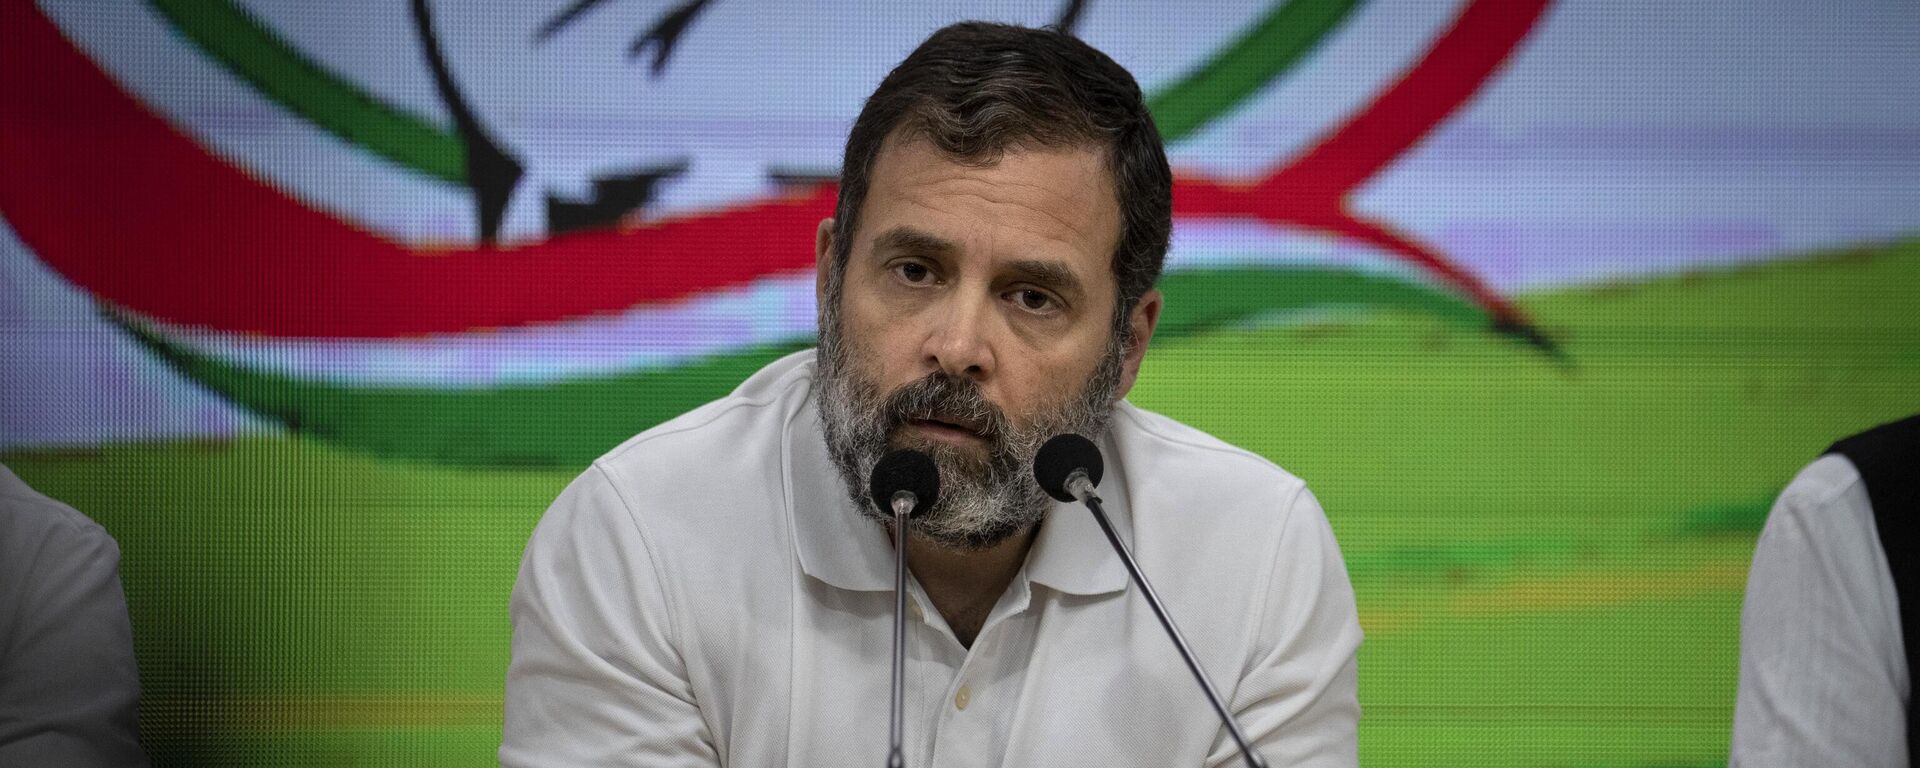 Indian opposition leader Rahul Gandhi addresses a press conference after he was expelled from parliament Friday, a day after a court convicted him of defamation and sentenced him to two years in prison for mocking the surname Modi in an election speech, in New Delhi, India, Saturday, March 25, 2023. - Sputnik India, 1920, 30.03.2023